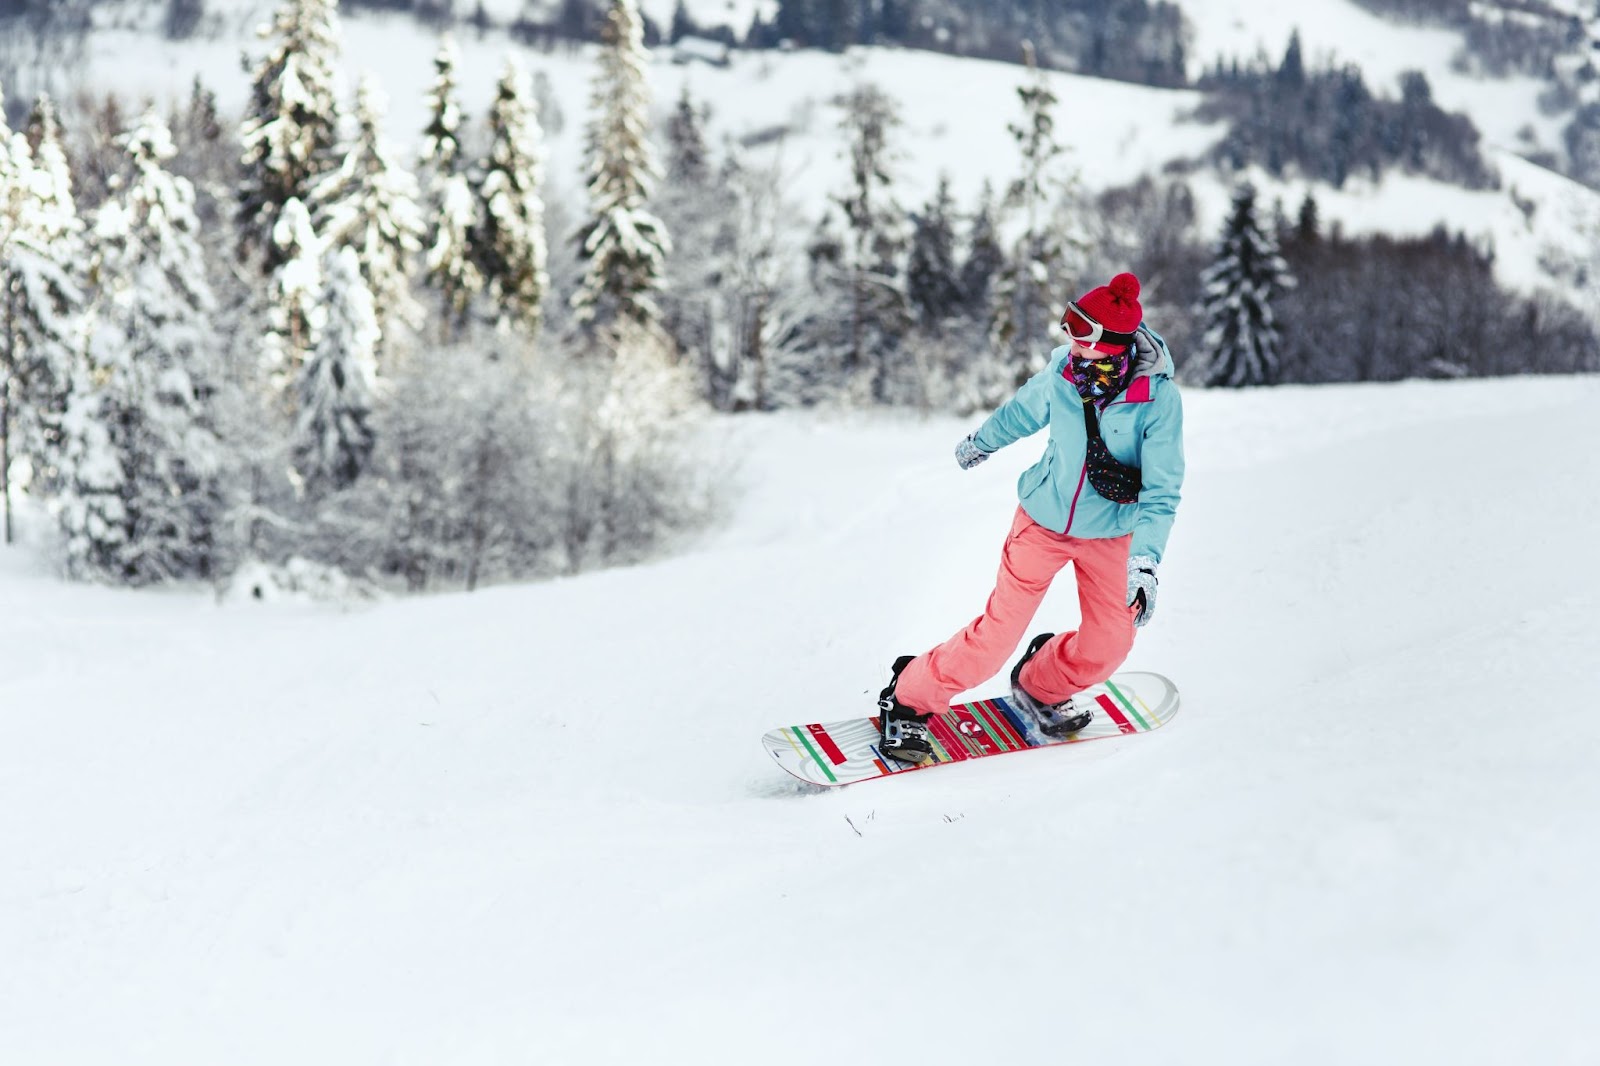 a woman on a snowboard going down a snowy hill